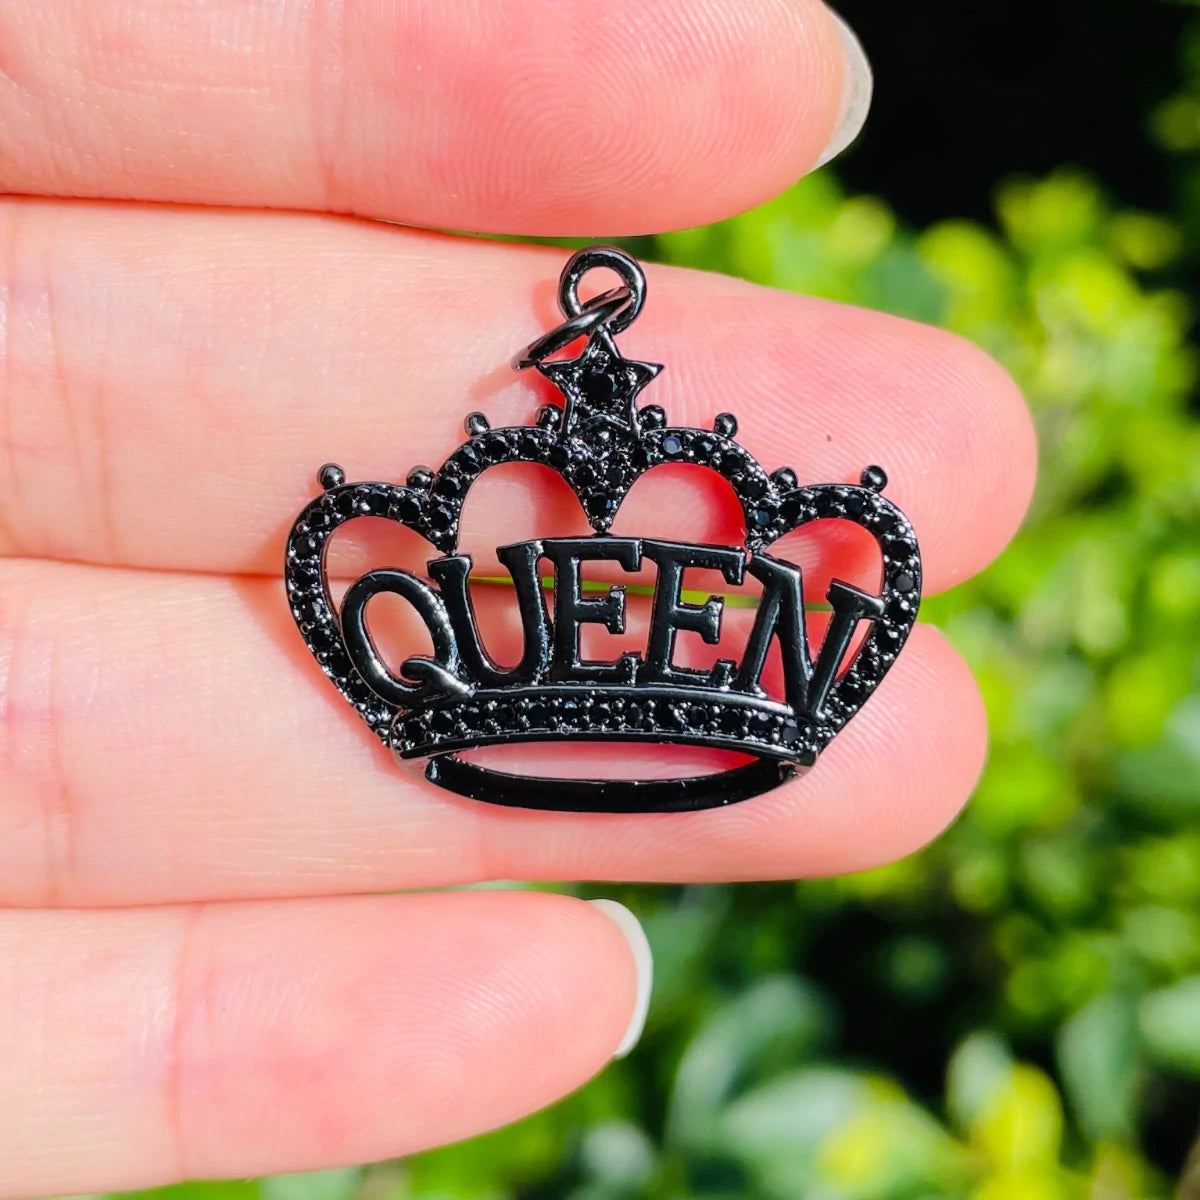 10pcs/lot 28*25mm CZ Paved Crown Queen Word Charms Black on Black CZ Paved Charms Crowns New Charms Arrivals Queen Charms Charms Beads Beyond